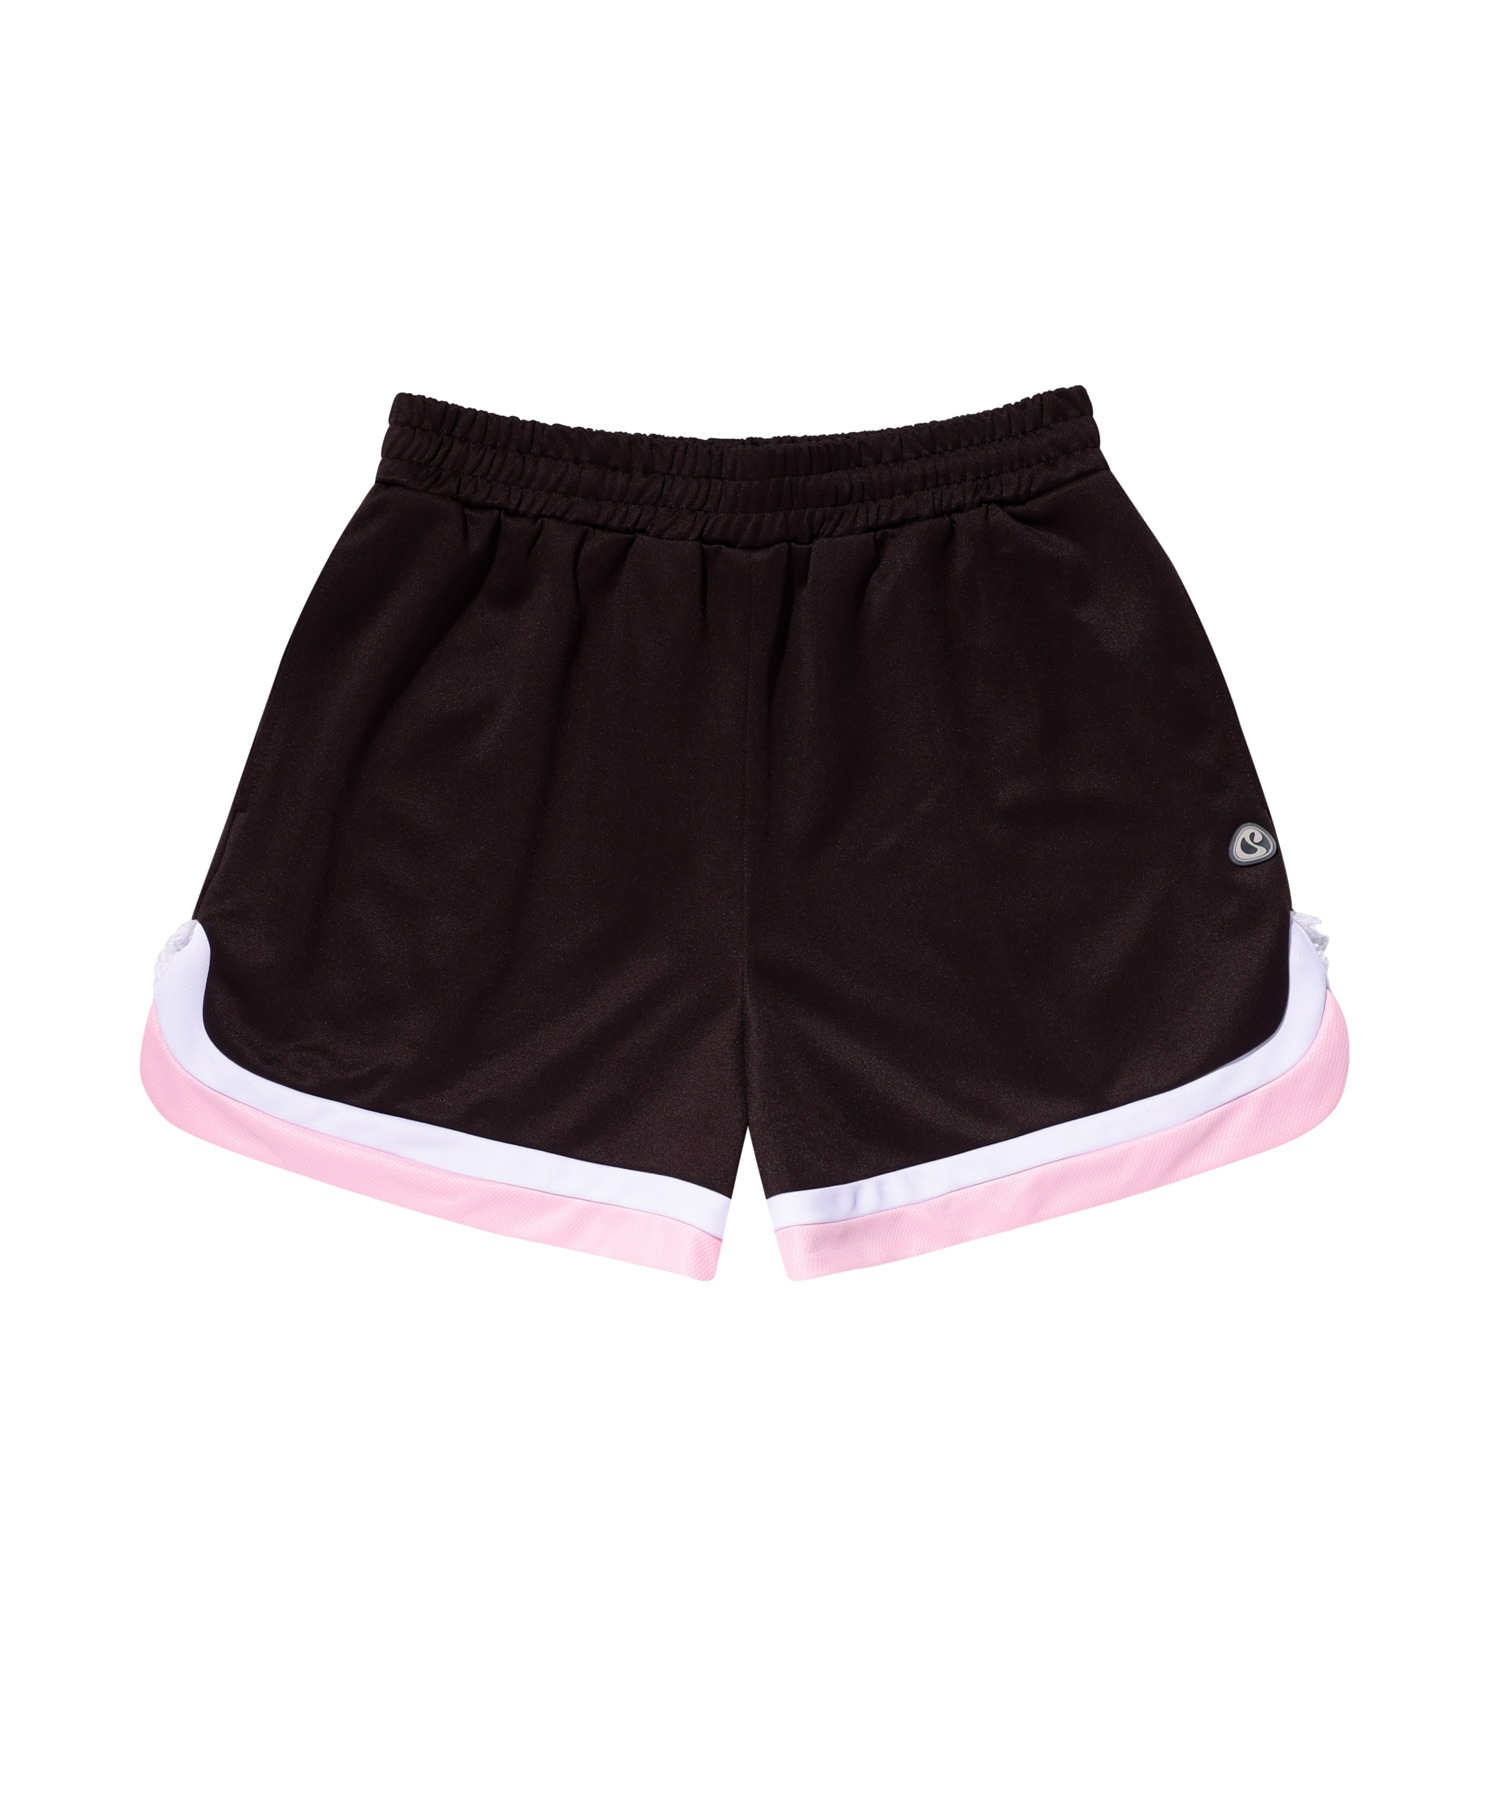 LACE JERSEY SHORTS BROWN